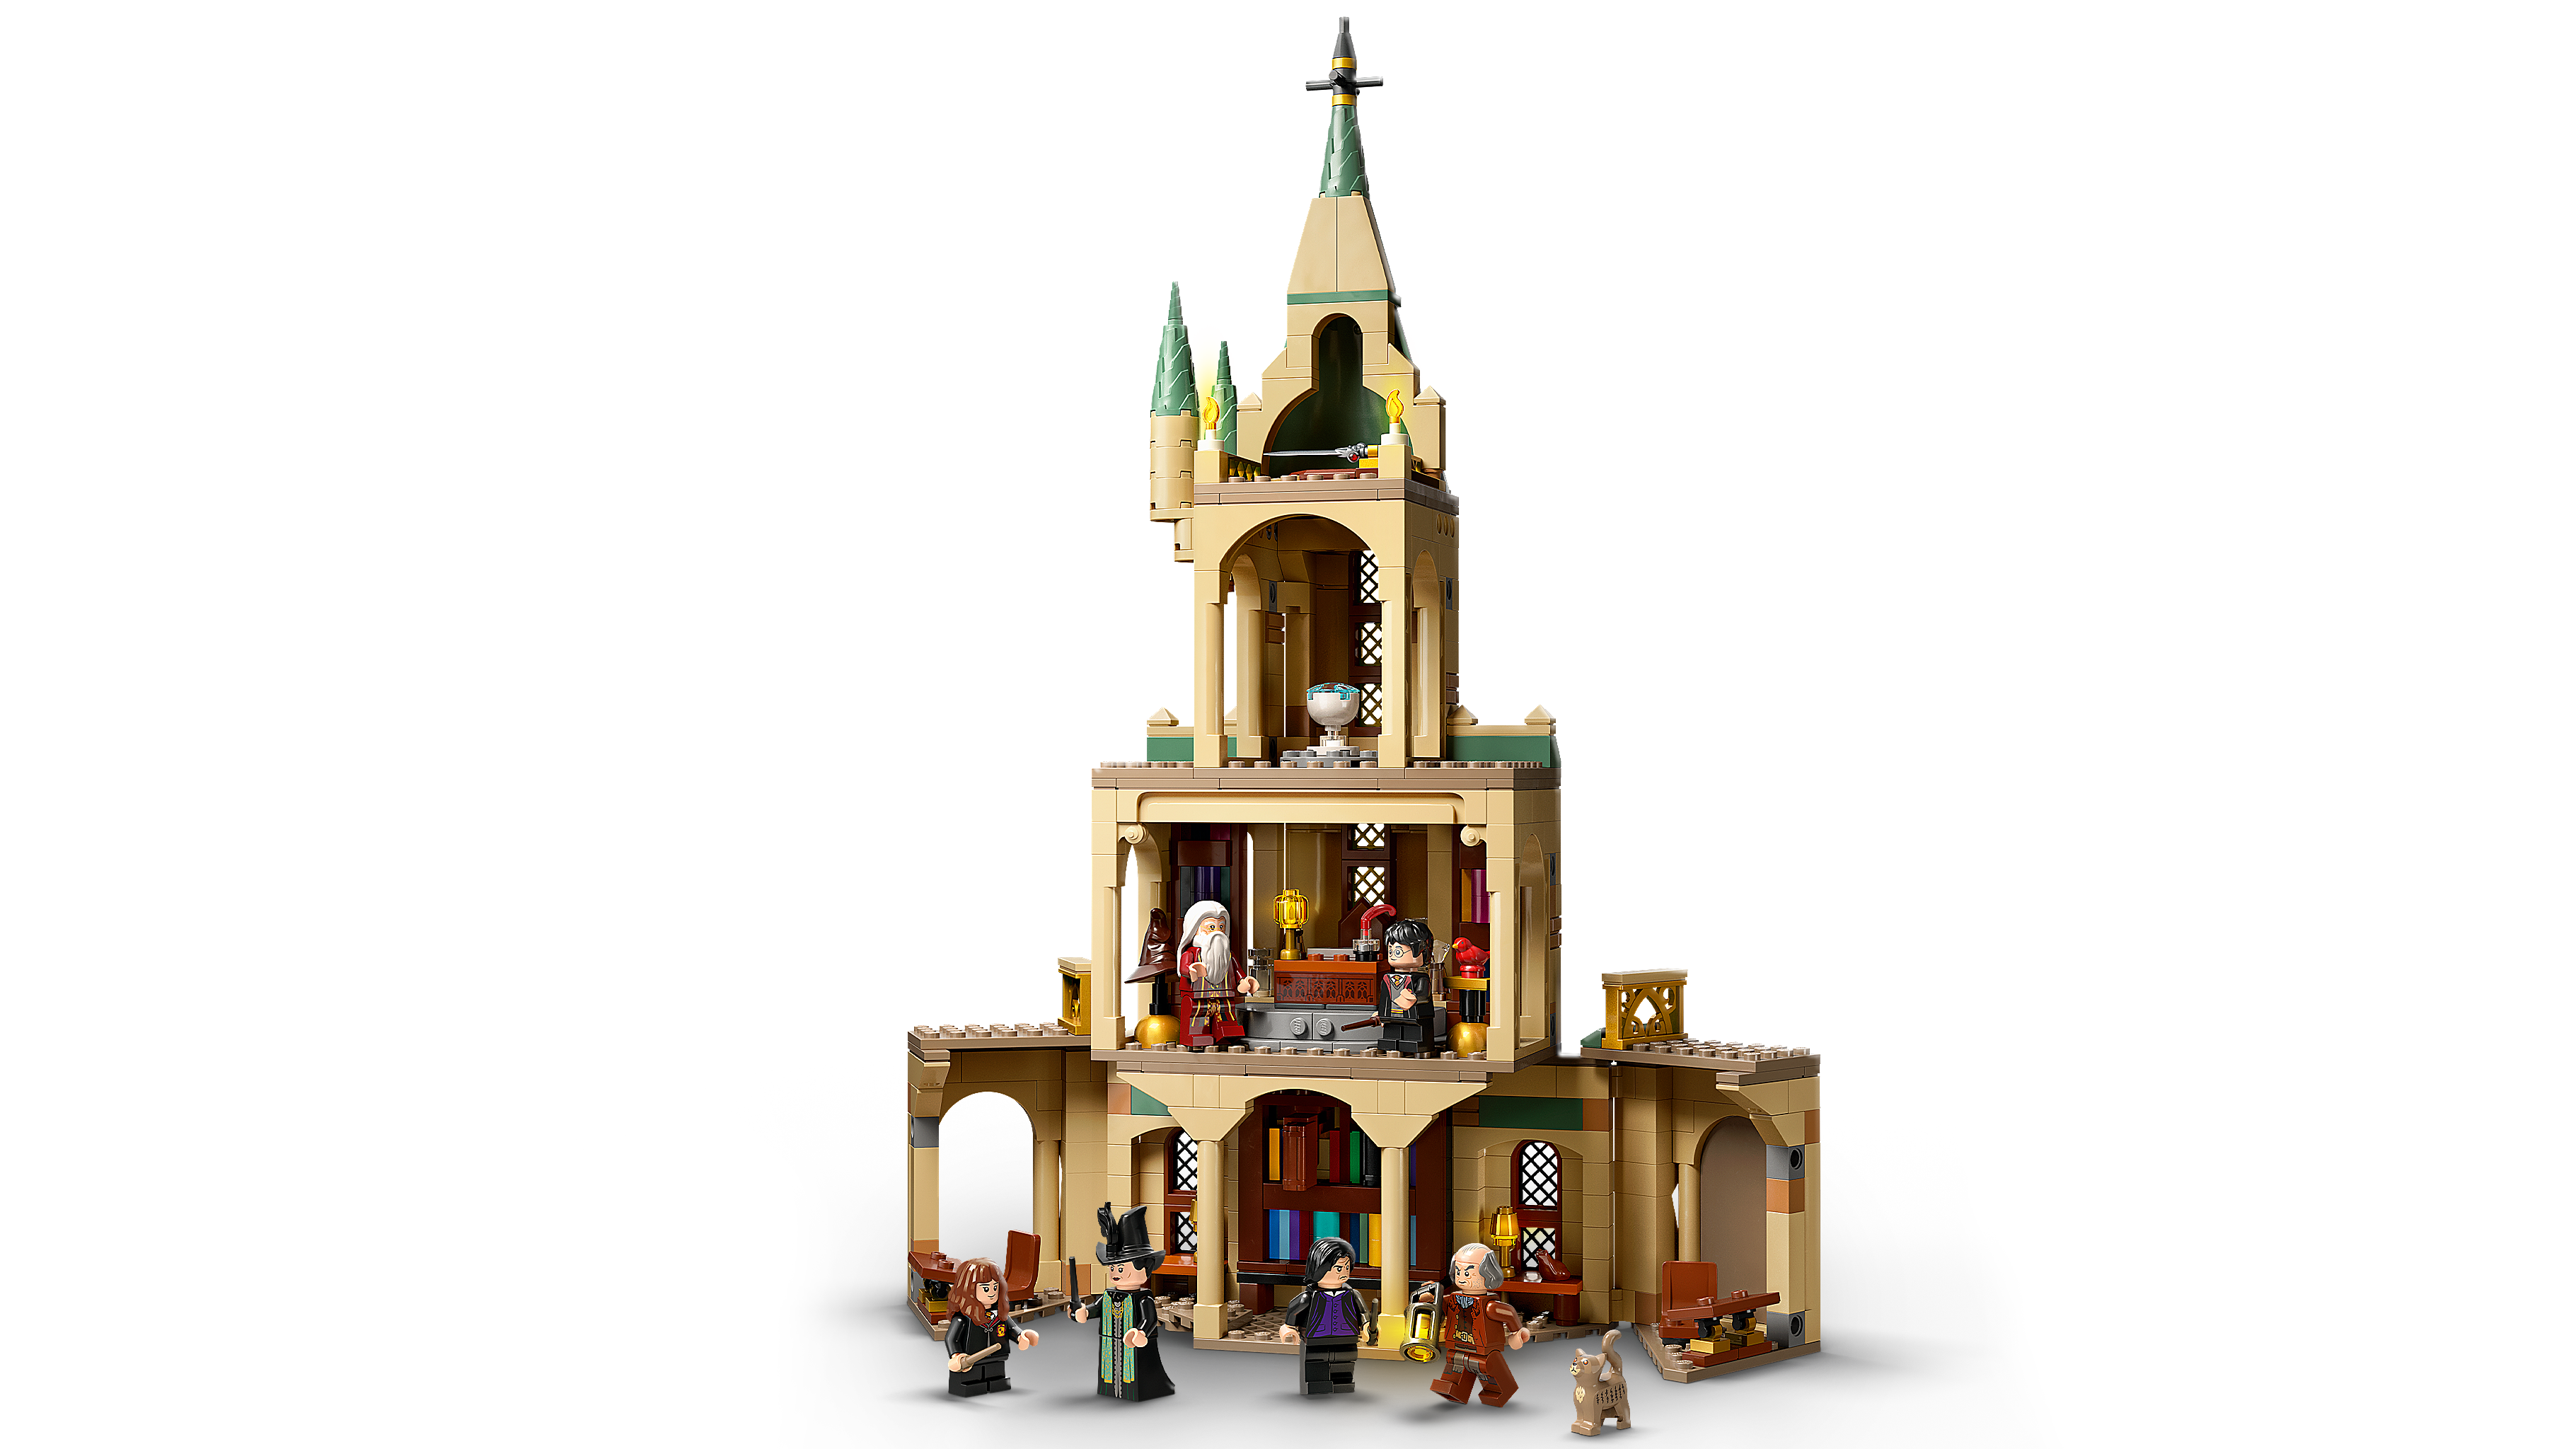 LEGO Harry Potter Hogwarts: Dumbledore’s Office 76402 Castle Toy, Set with  Sorting Hat, Sword of Gryffindor and 6 Minifigures, for Kids Aged 8 Plus